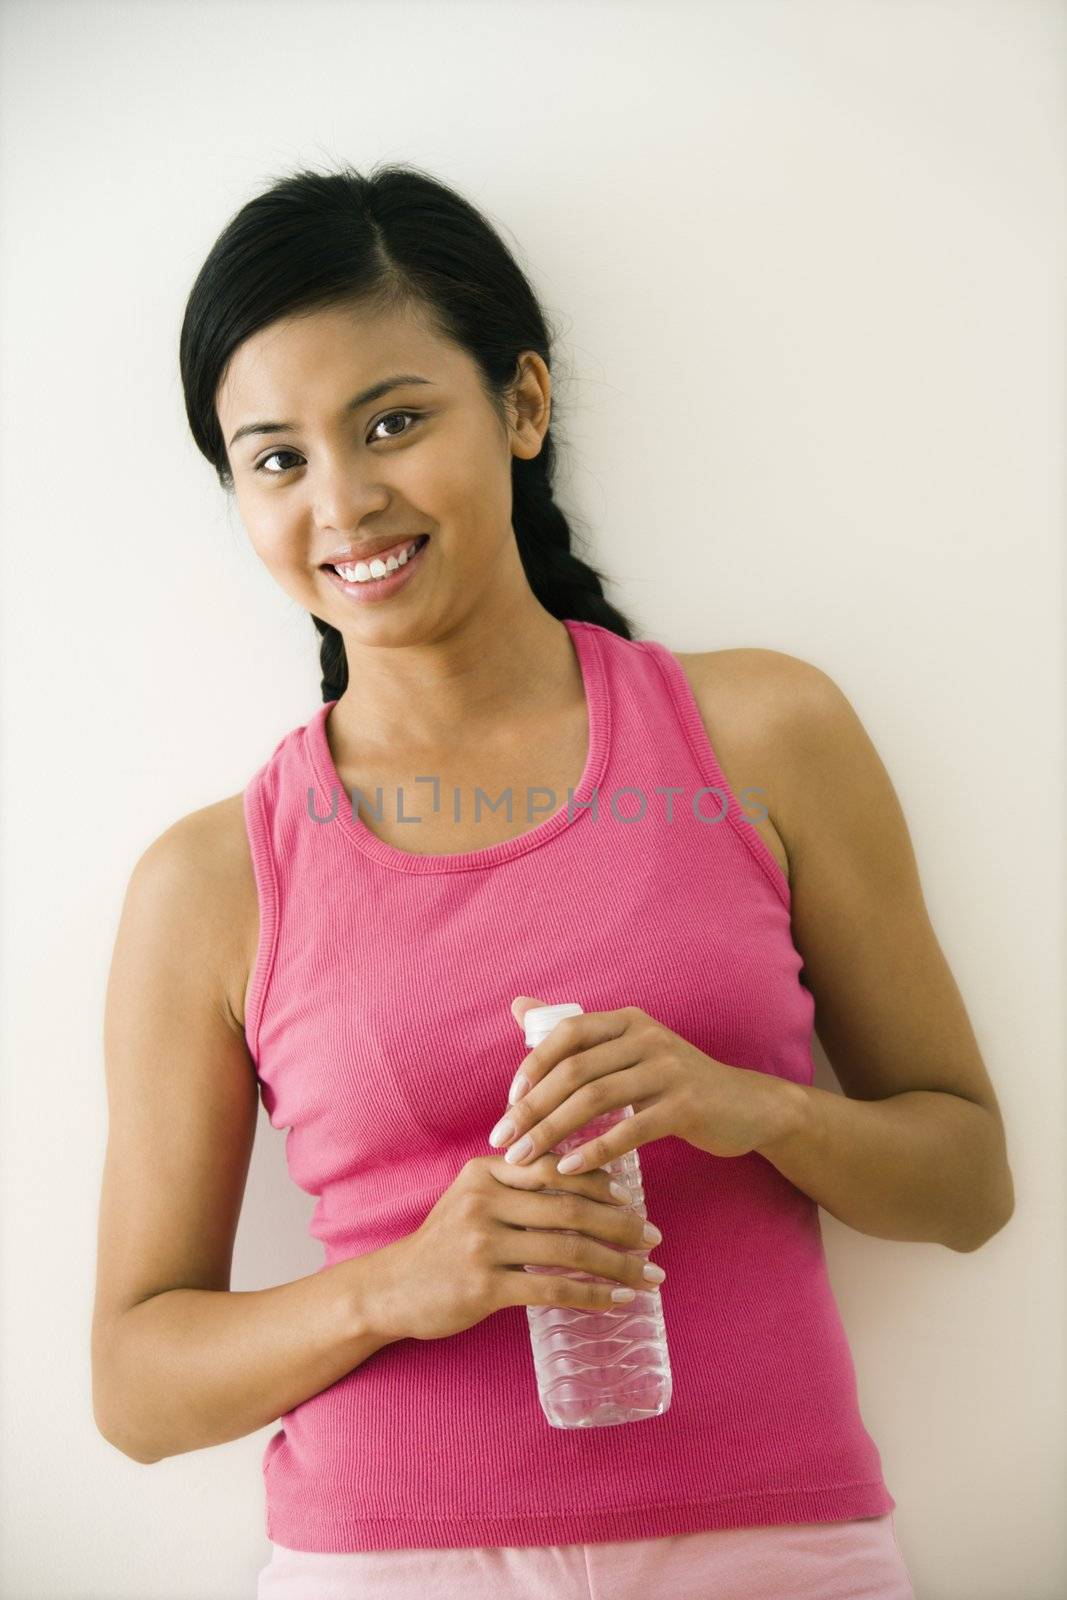 Portrait of smiling young Asian woman standing in fitness clothes holding bottle of water.